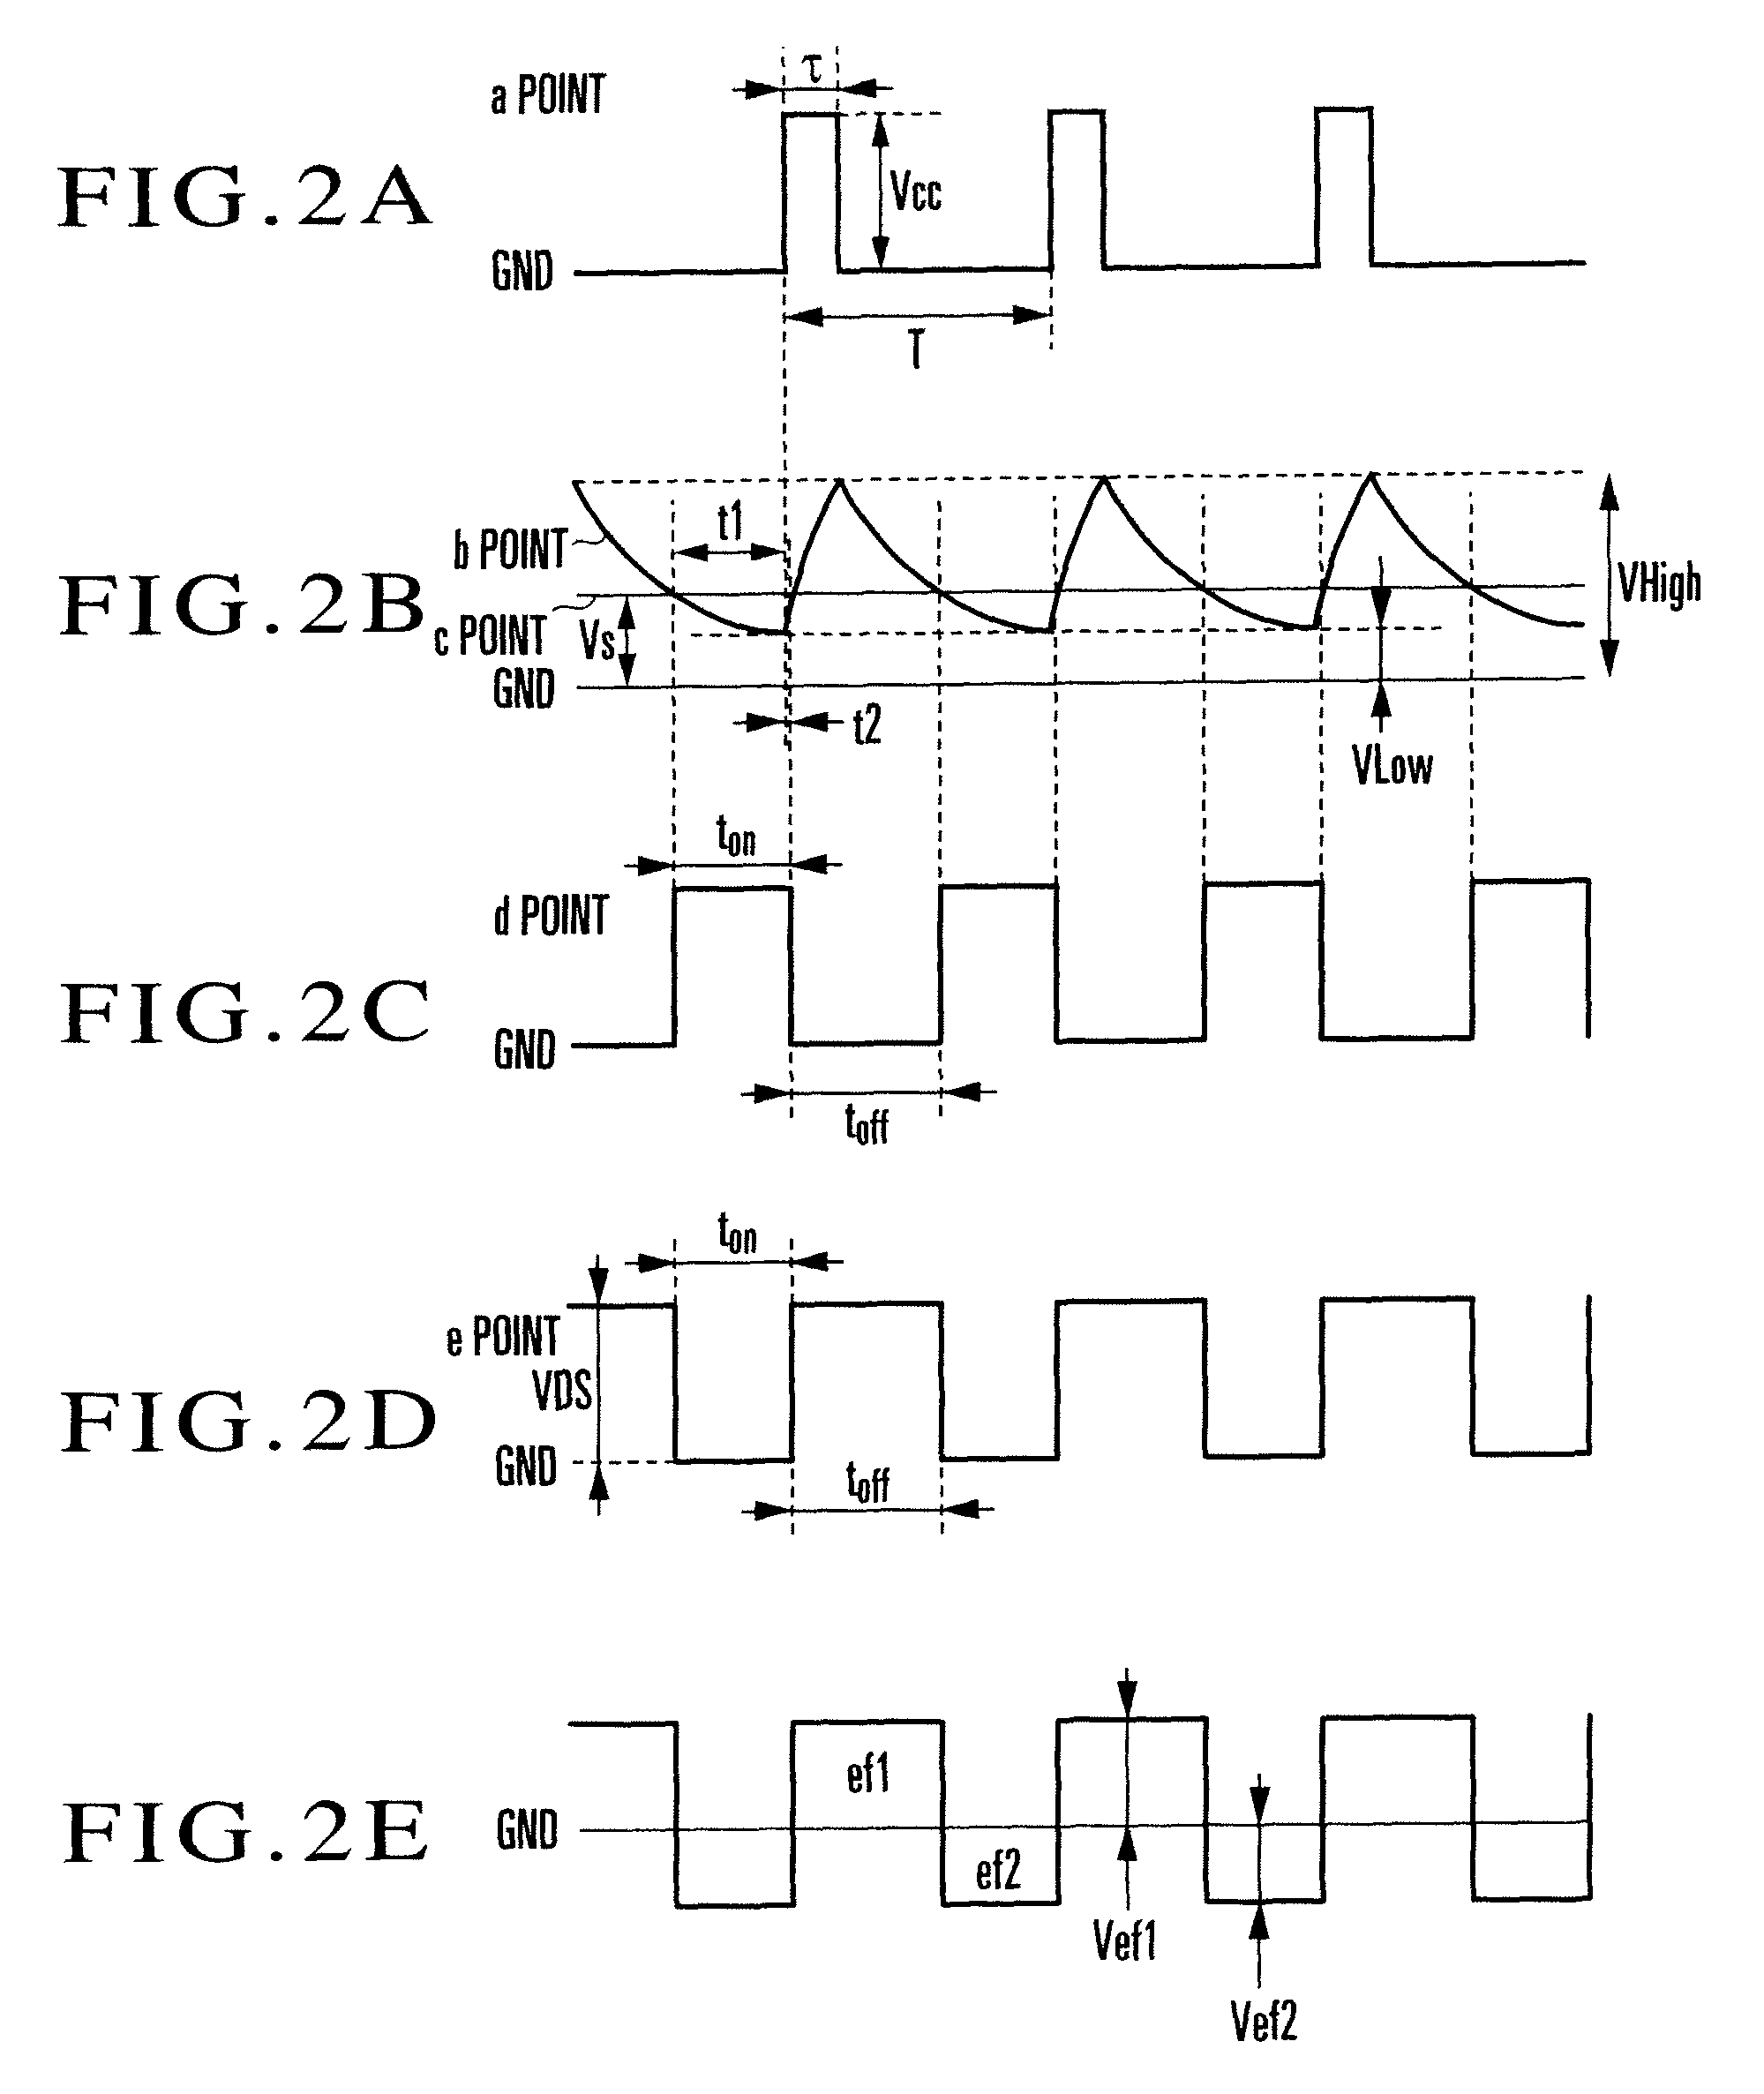 Filament power supply circuit for vacuum fluorescent display